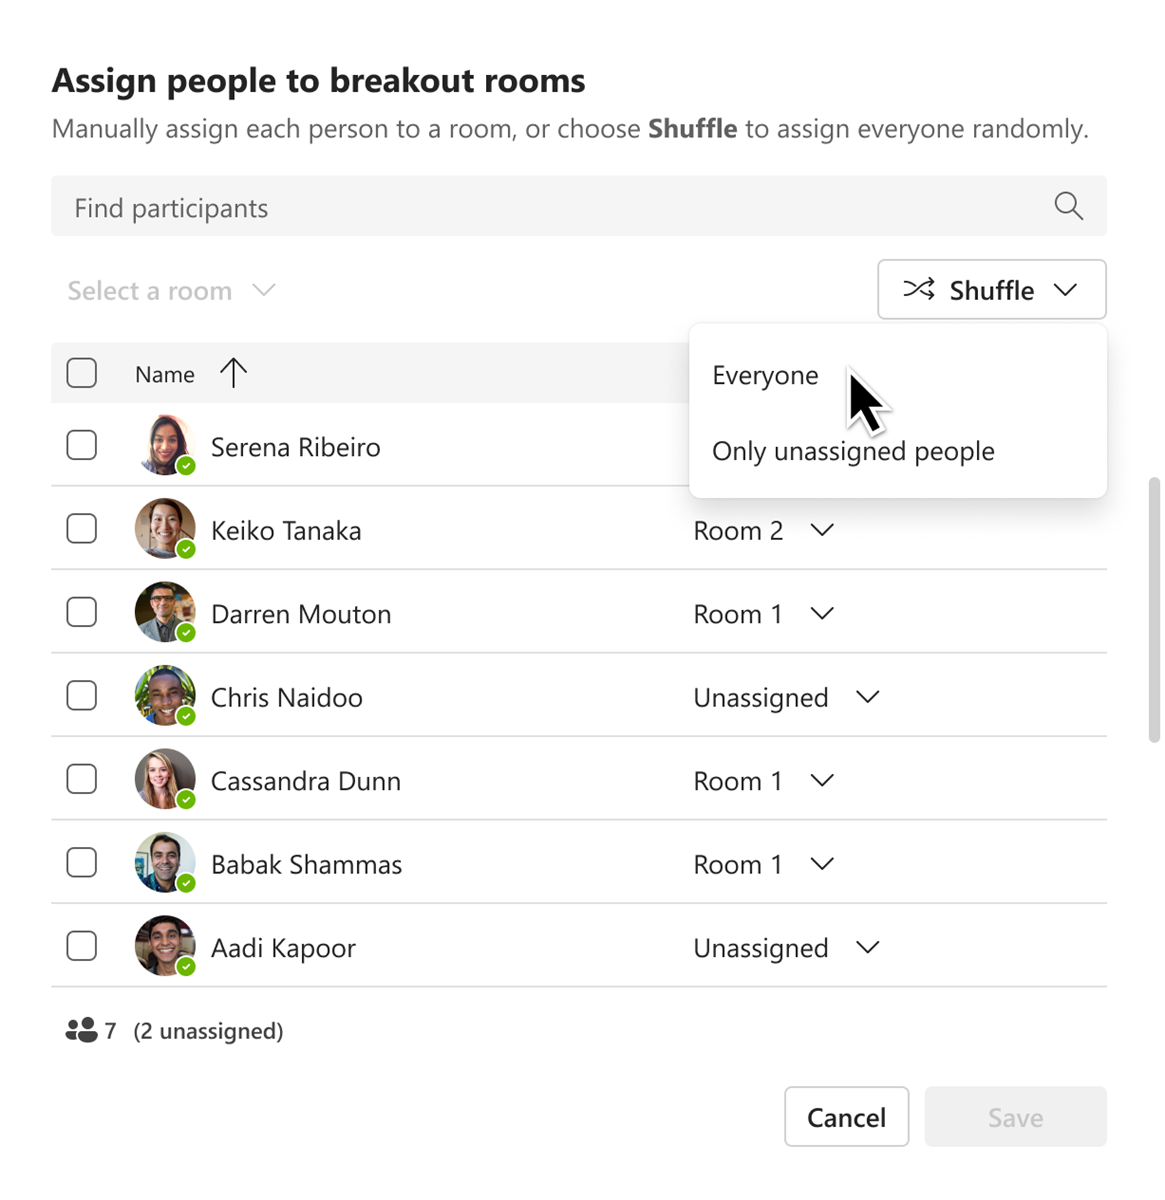 Assign people to breakout rooms window, showing the Shuffle menu